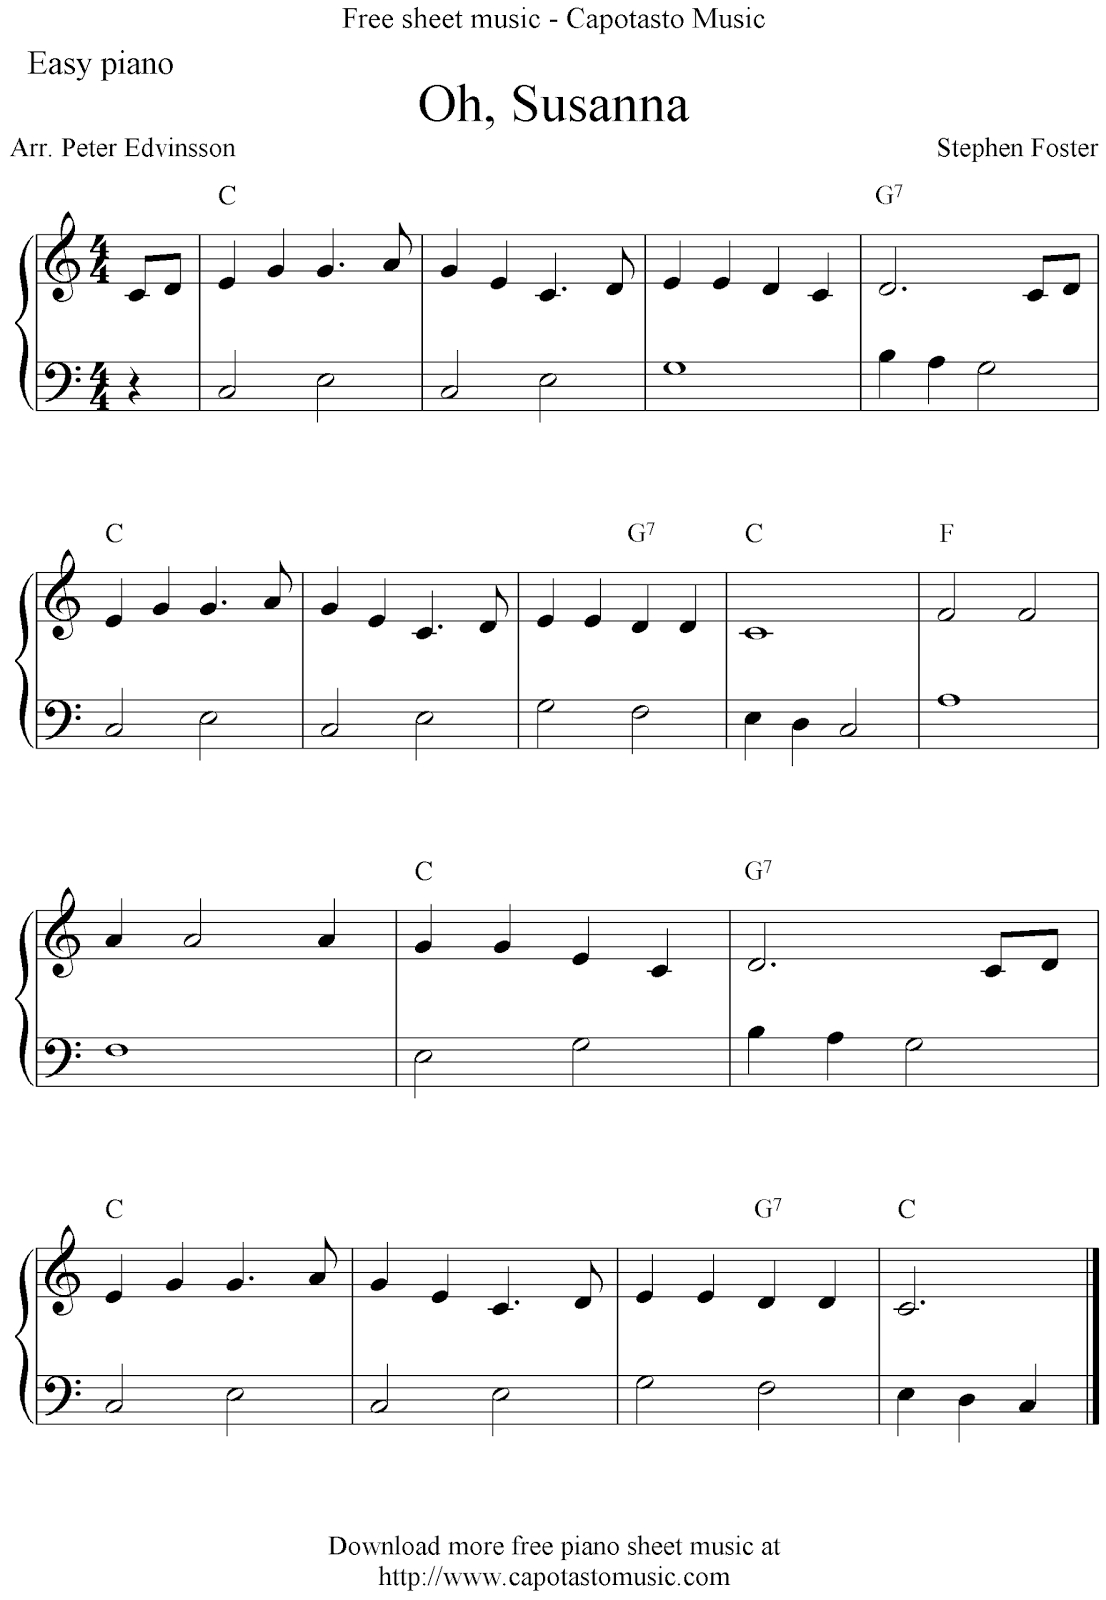 Easy Free Piano Sheet Music Arrangement With The Melody Oh, Susanna - All Of Me Easy Piano Sheet Music Free Printable